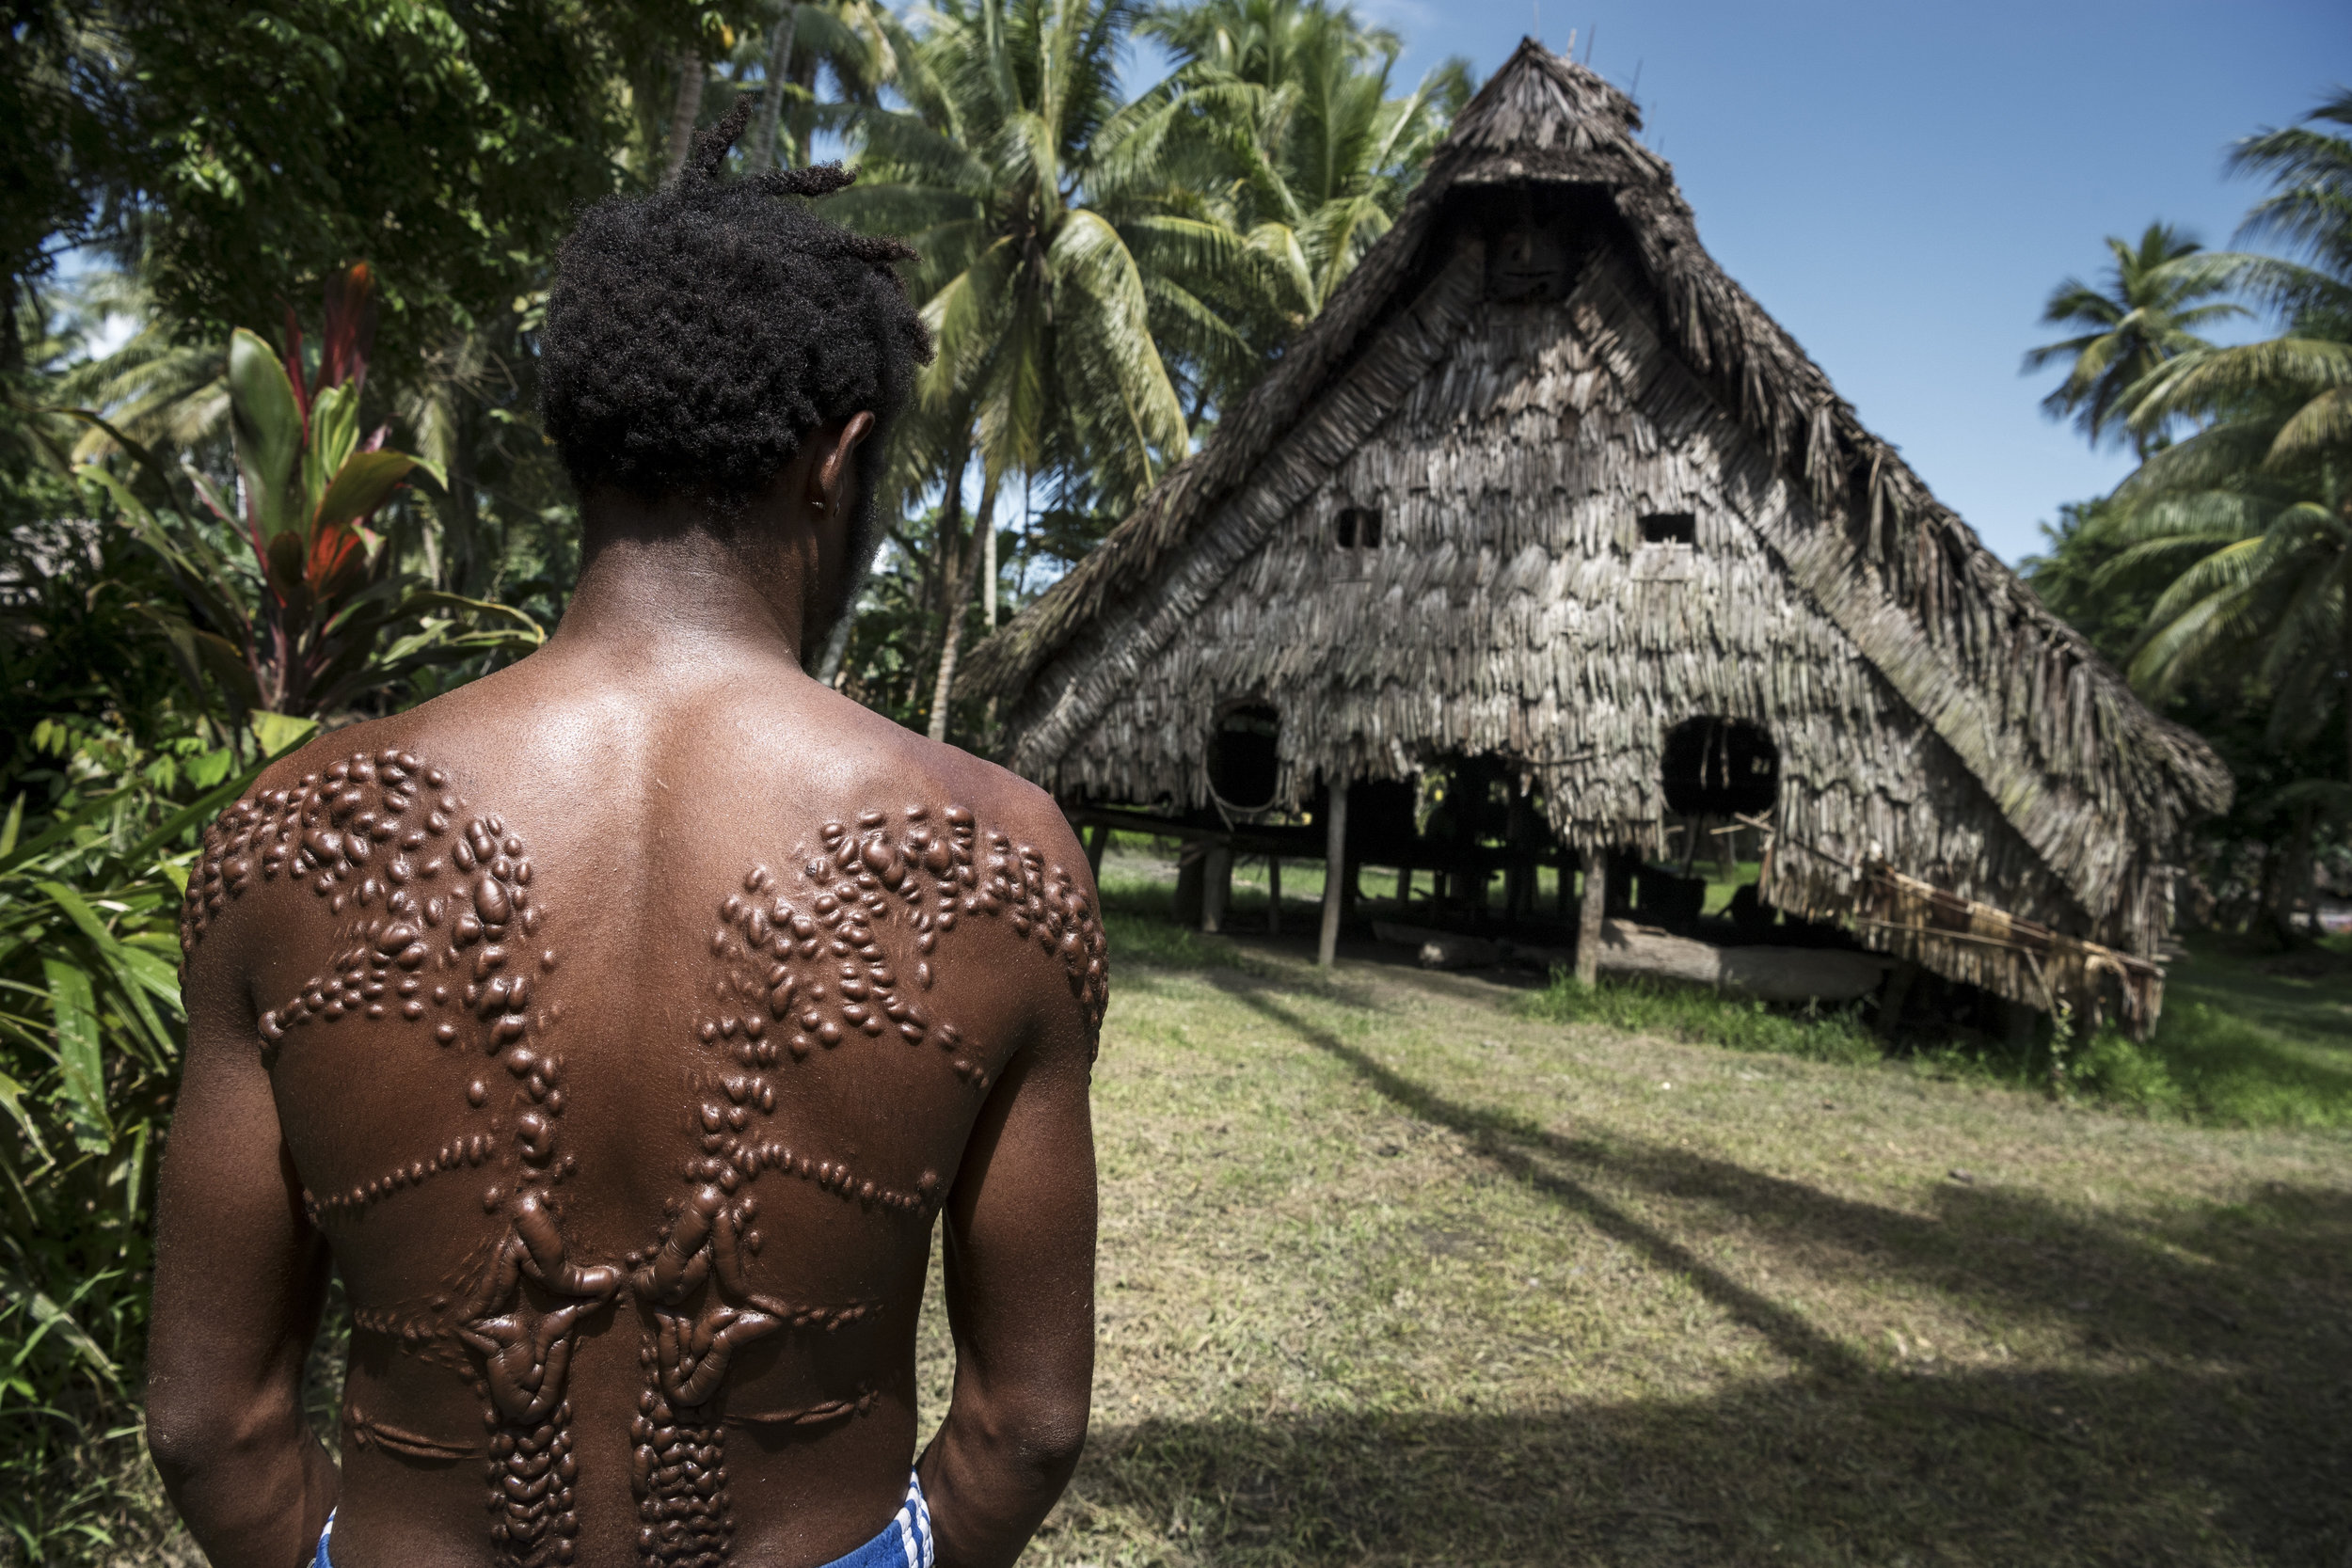  Every few years in Kandinge, Papua New Guinea a ceremony takes place where boys turn into manhood by cutting their skin and in this way simulating the pattern of a crocodile skin. 